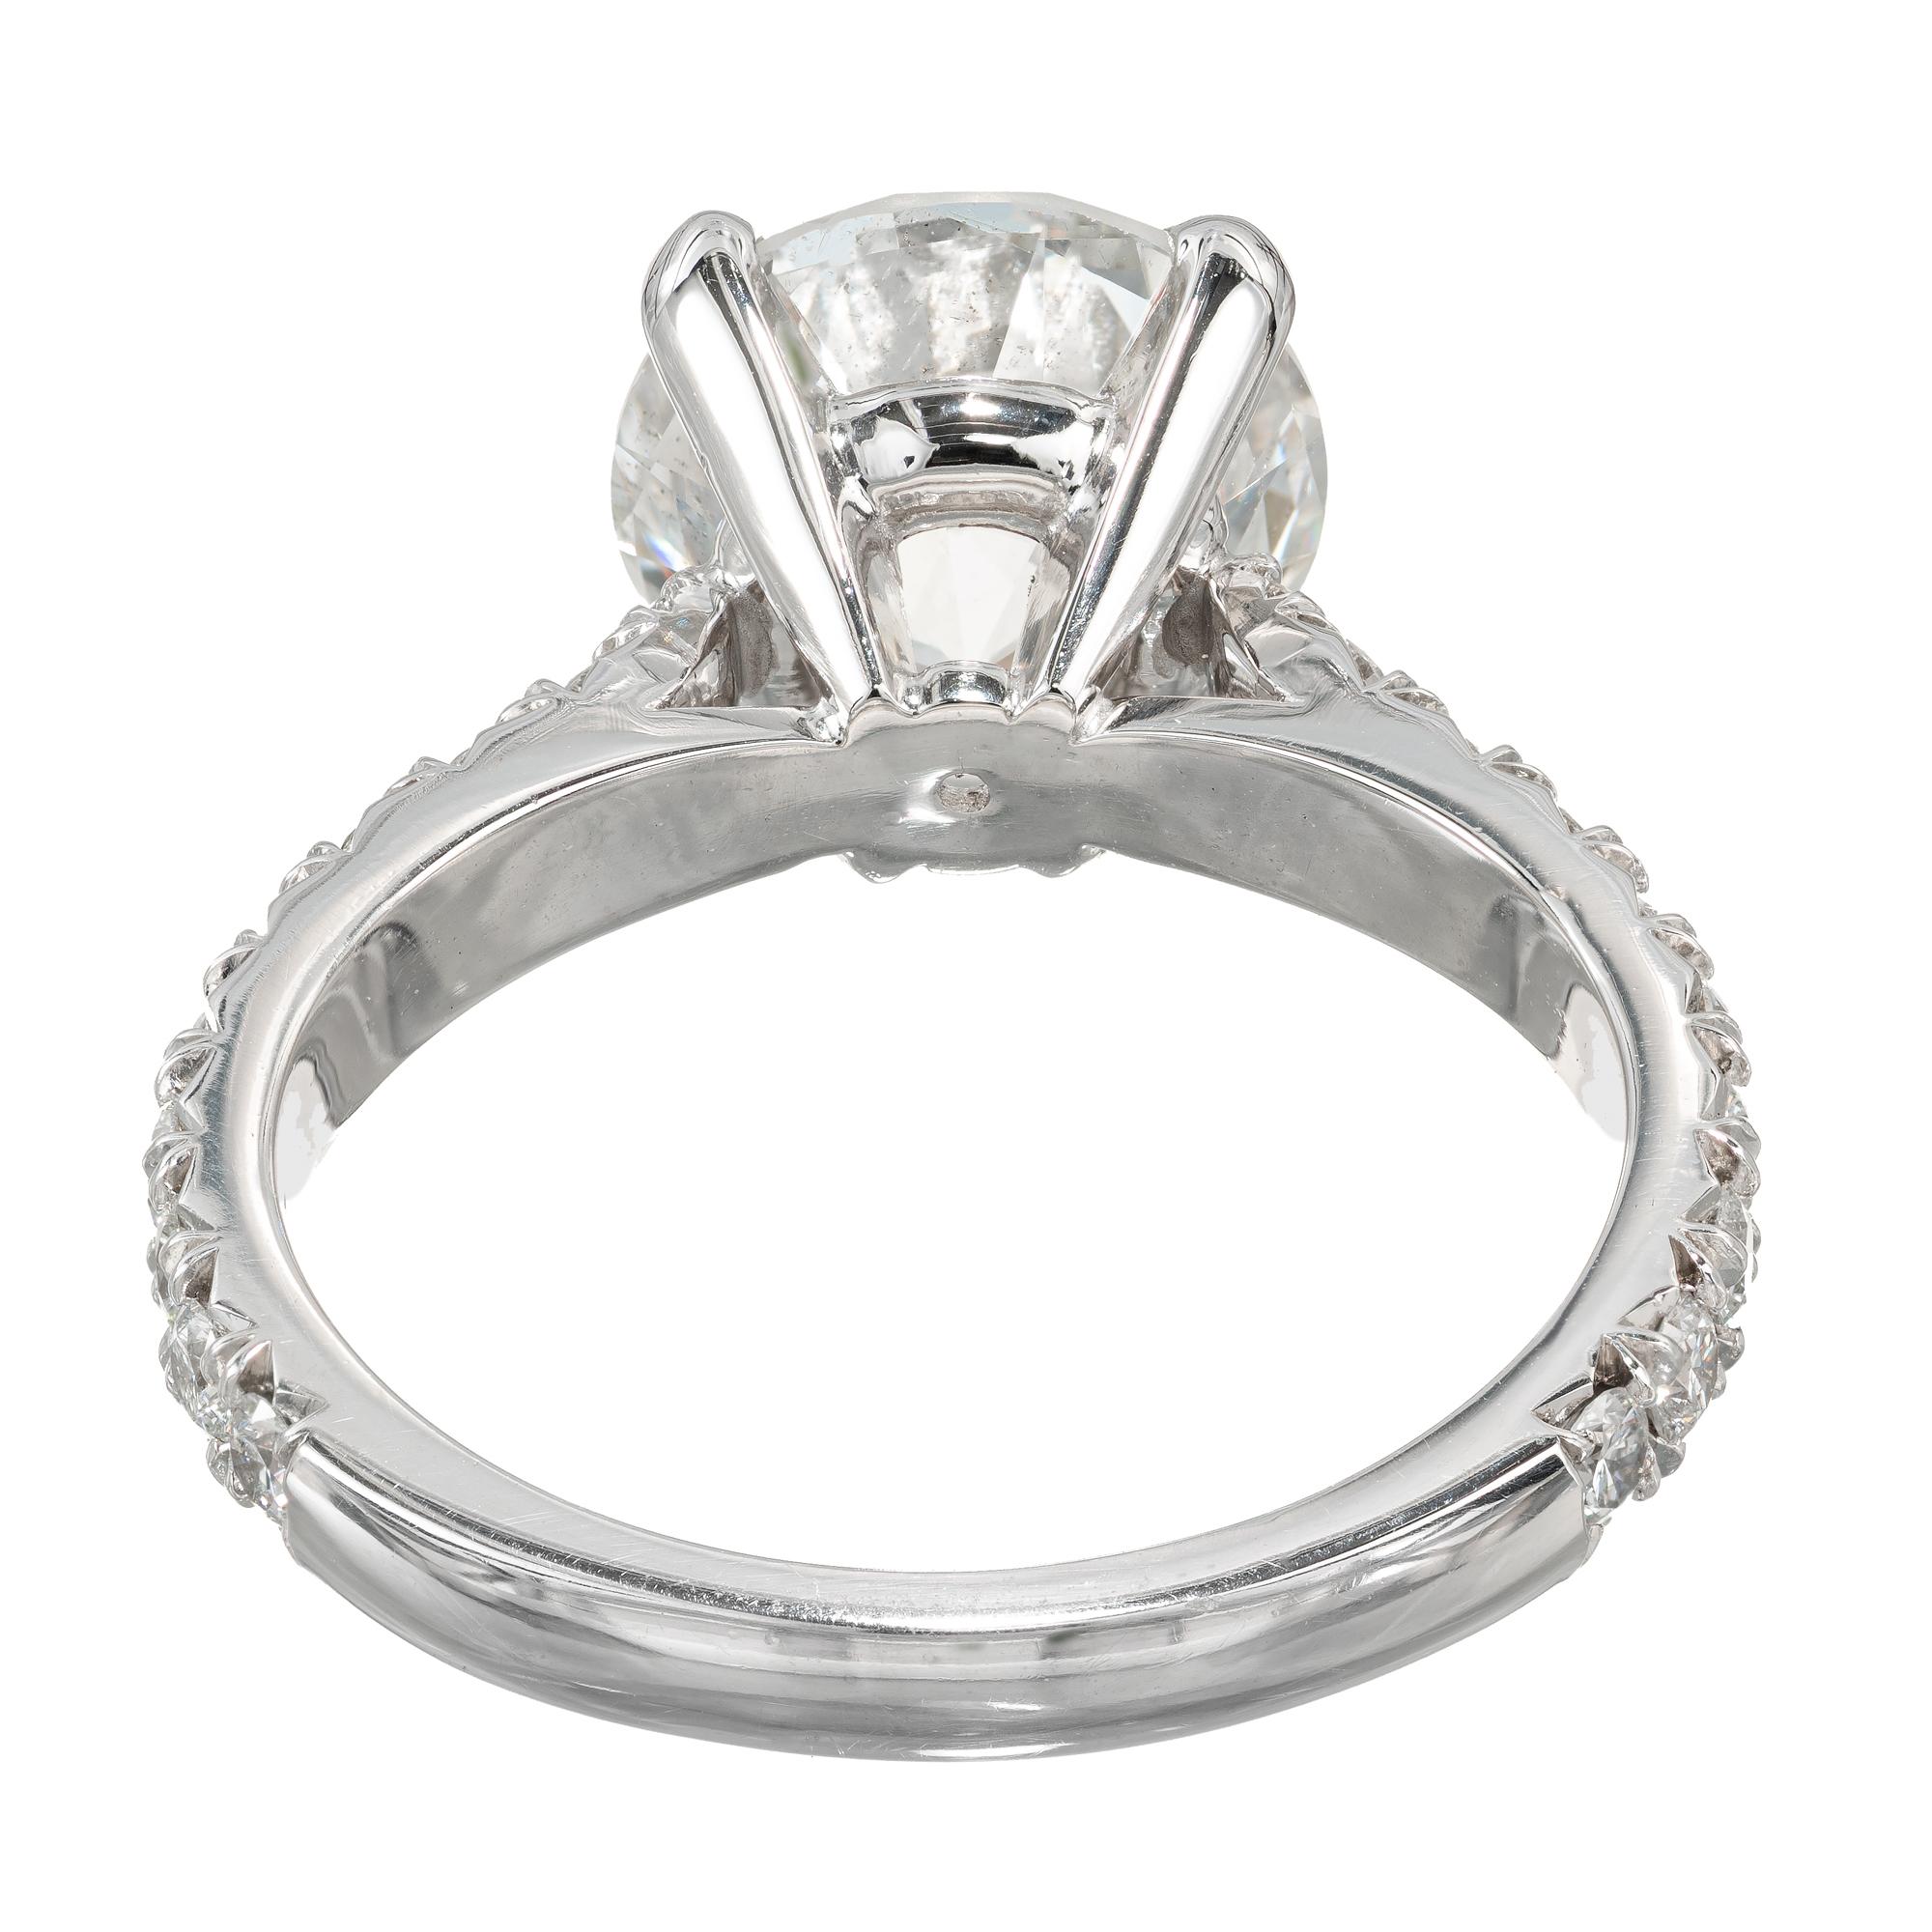 Peter Suchy GIA Certified 3.37 Carat Diamond Platinum Engagement Ring In New Condition For Sale In Stamford, CT